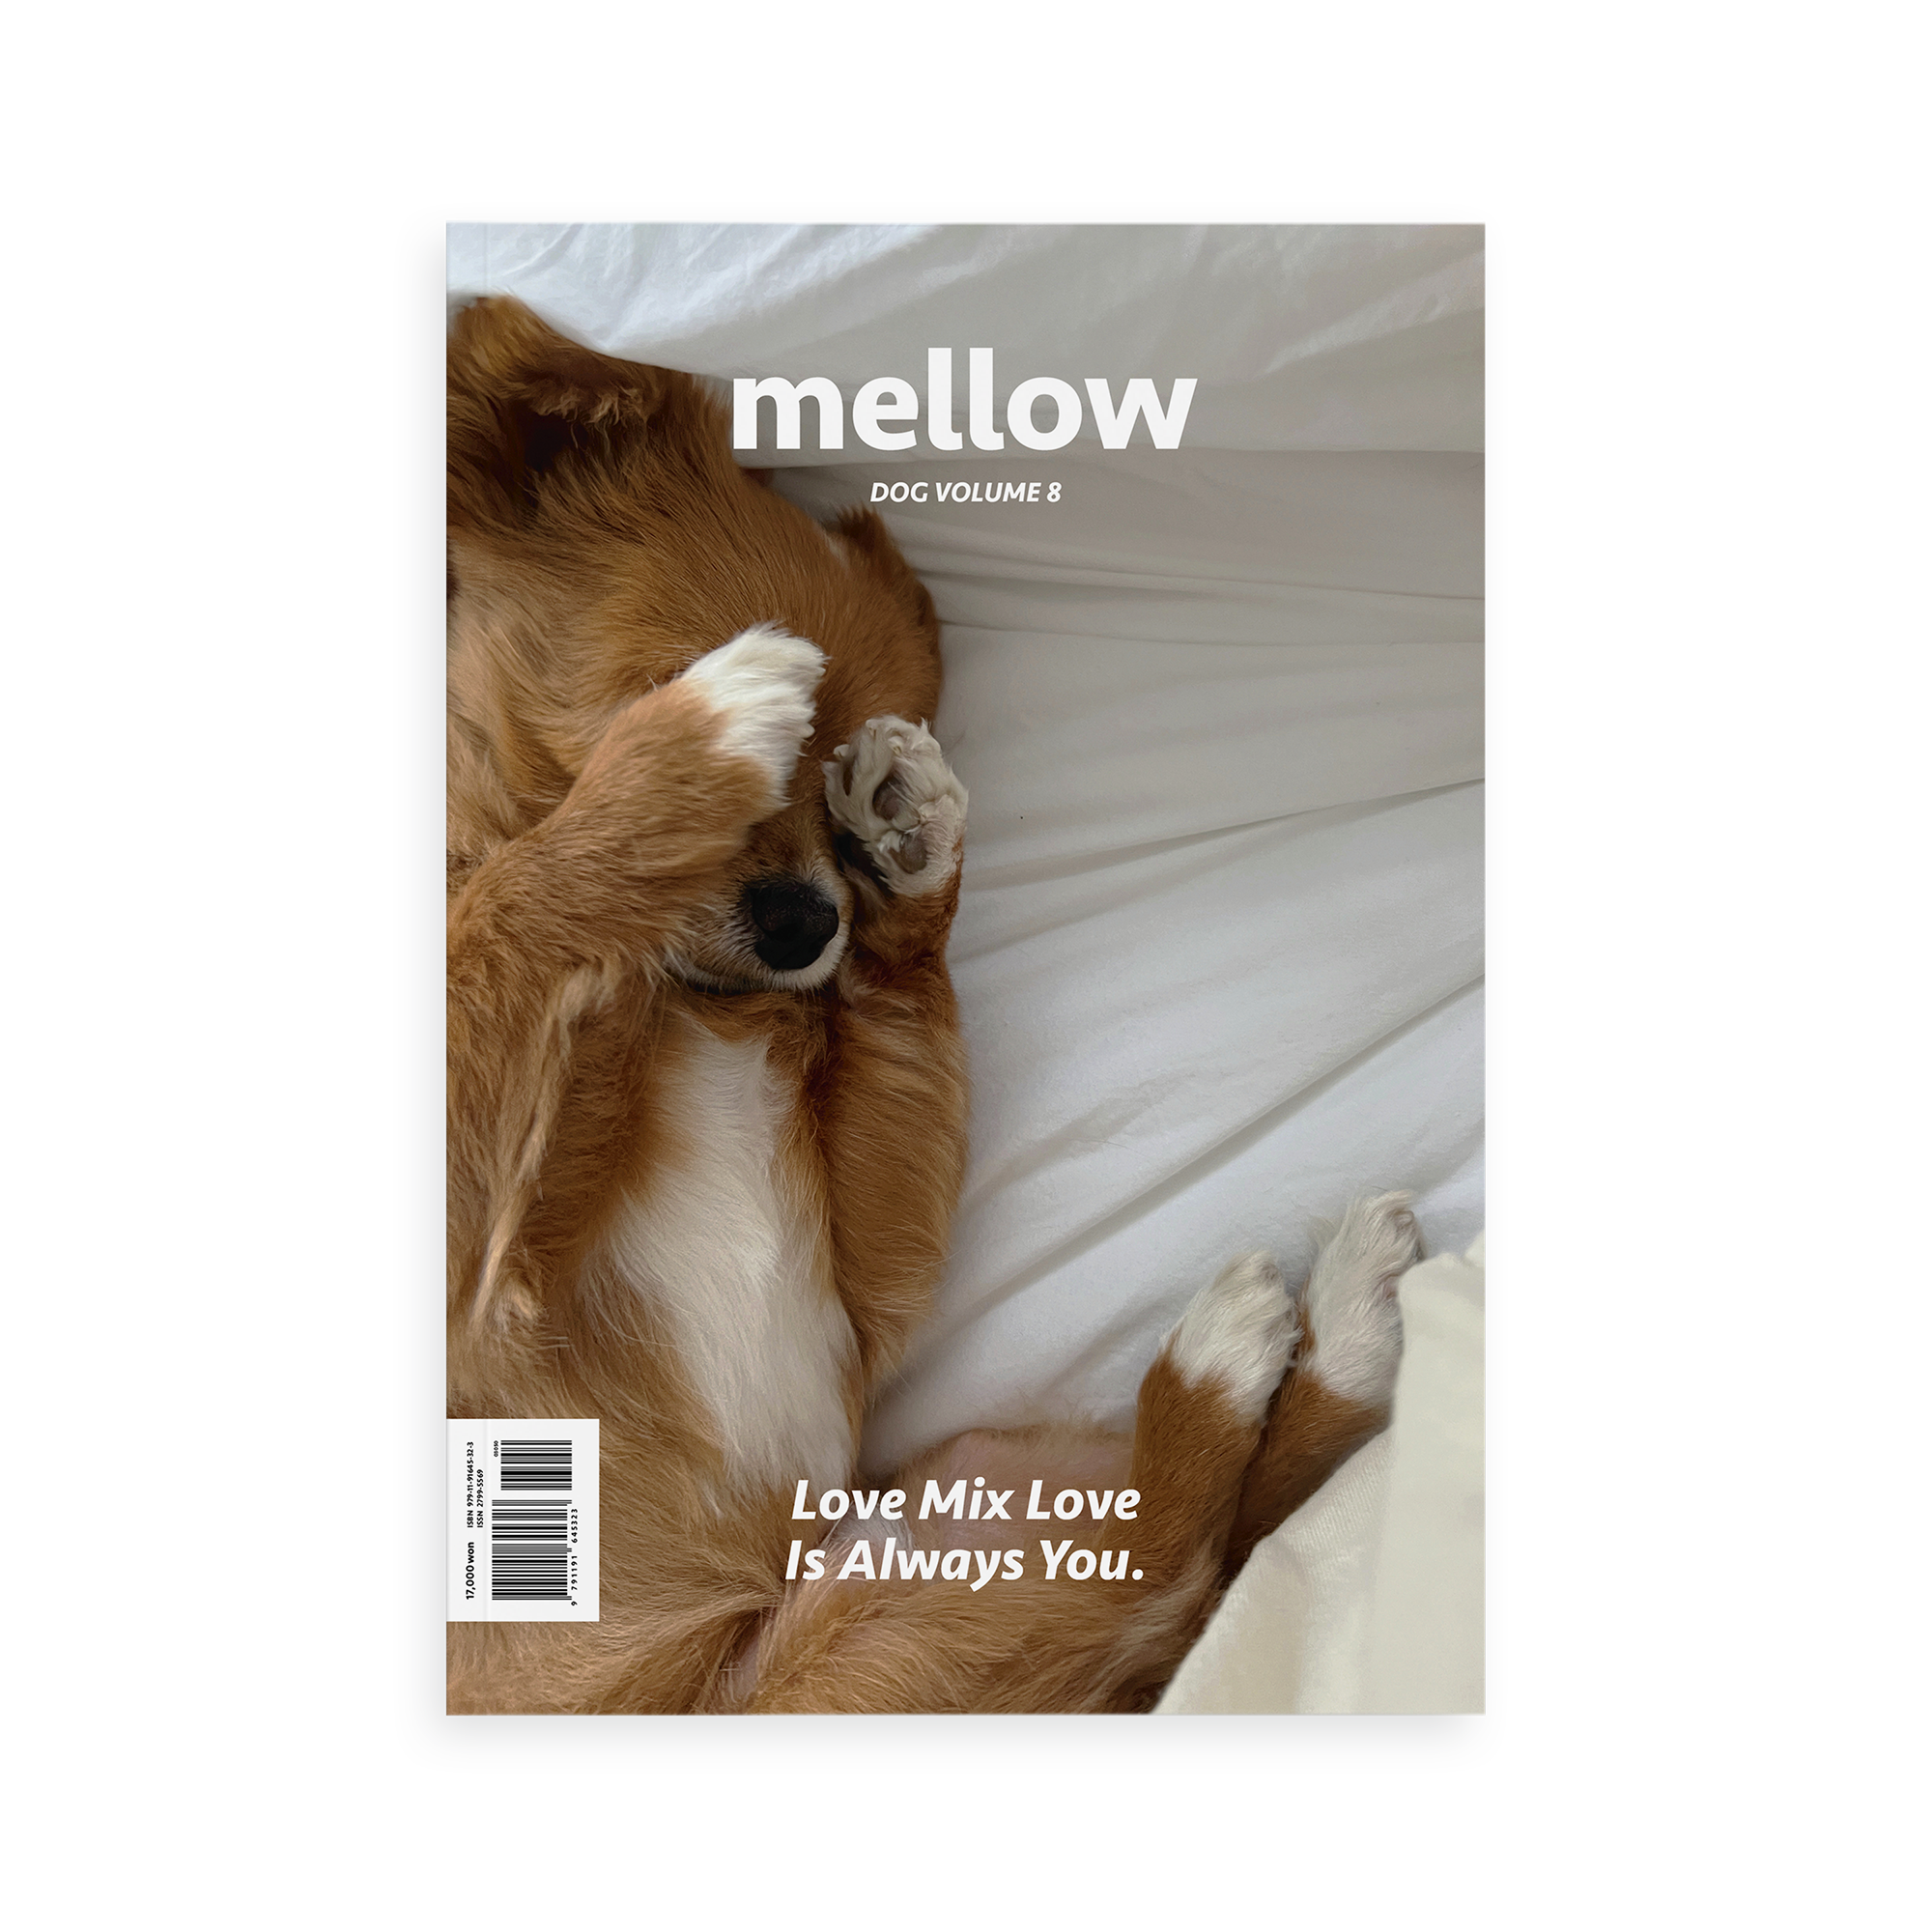 [ Vol.8 ] mellow dog / Love Mix Love Is Always You.